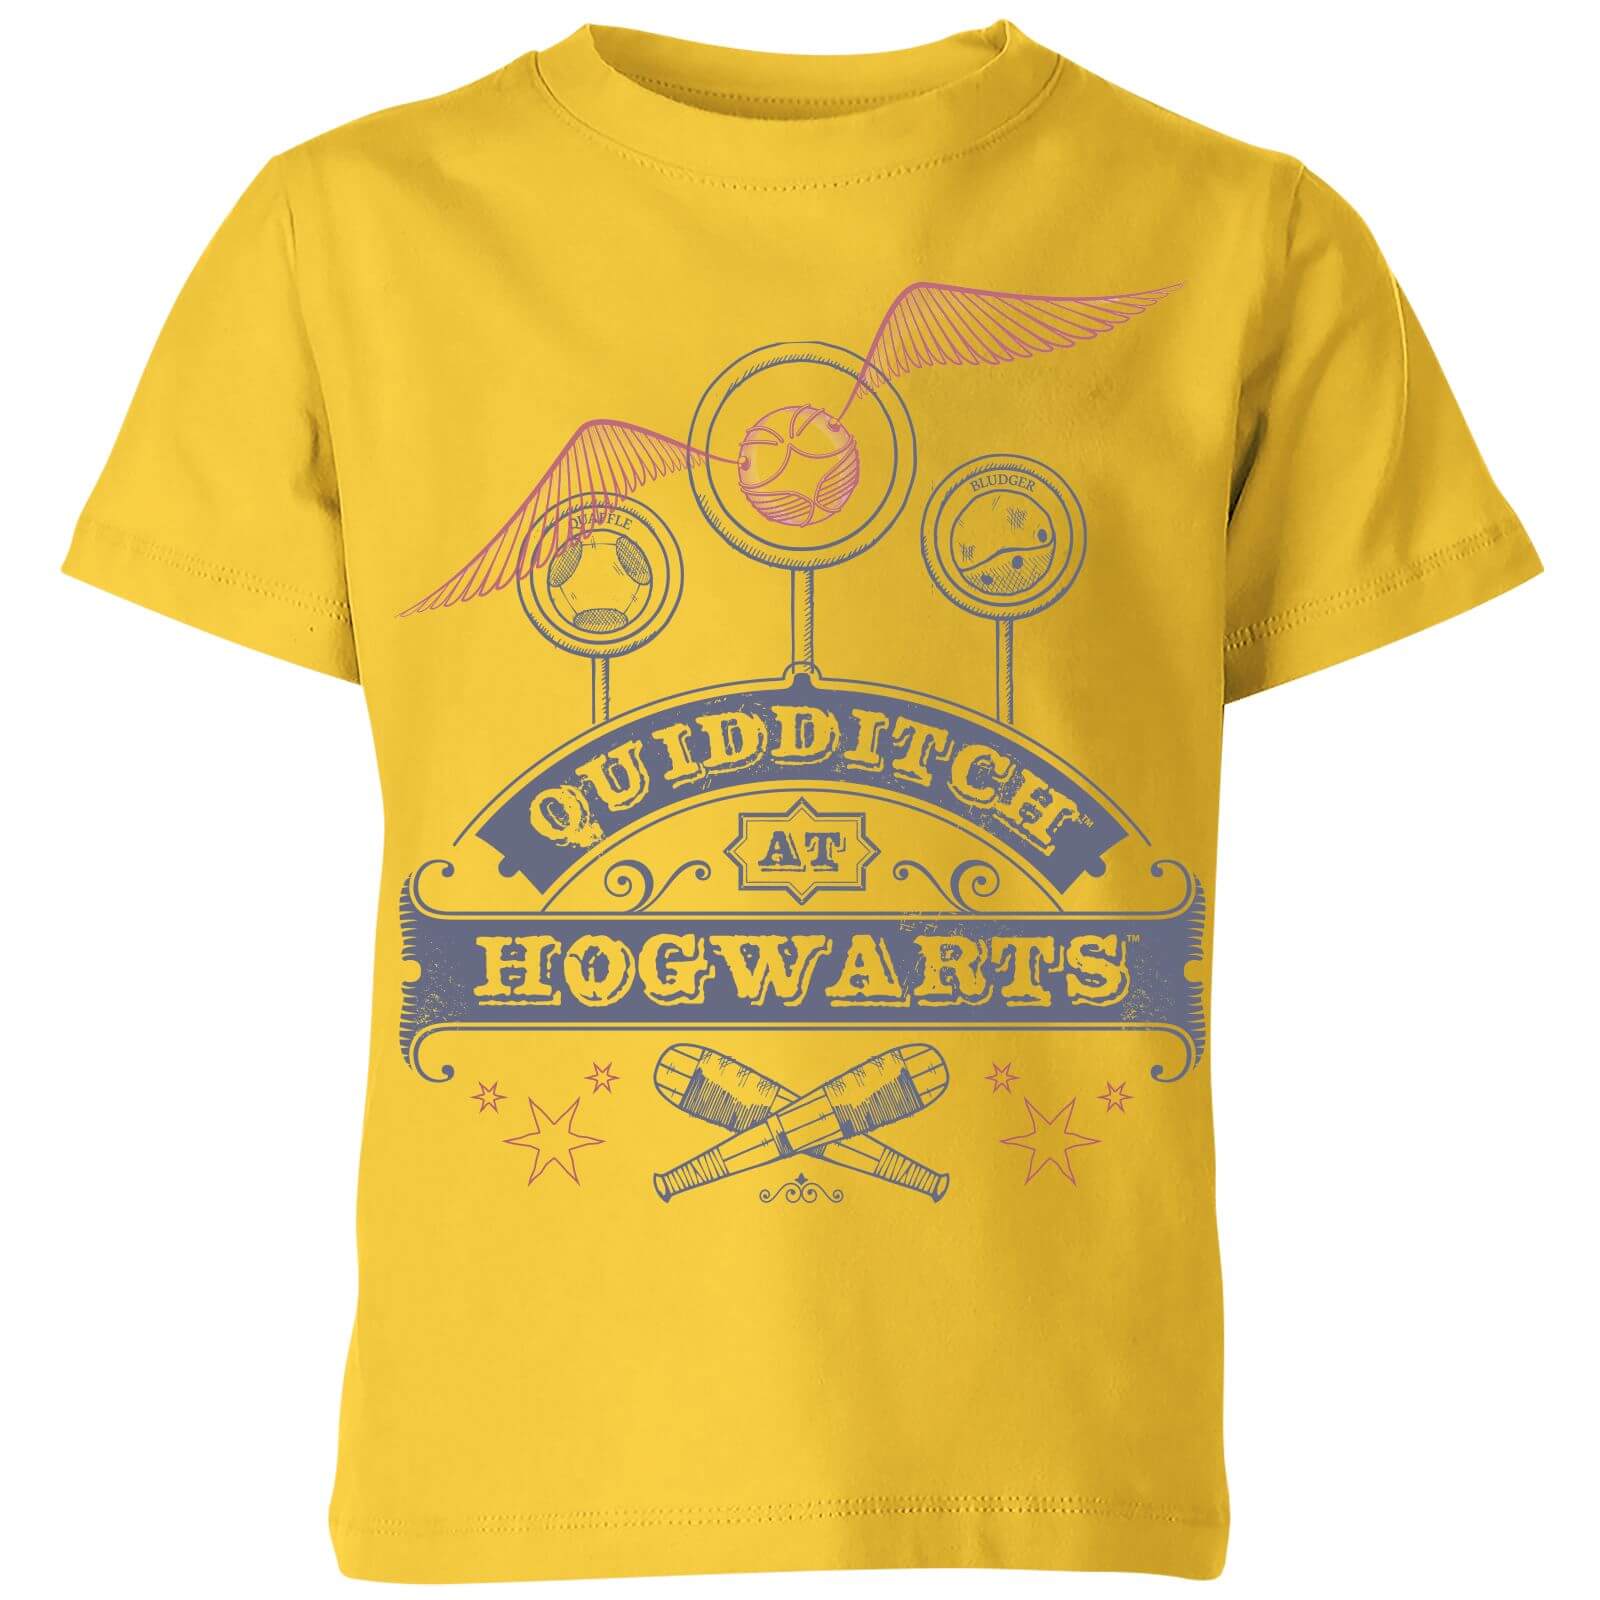 t-shirt harry potter quidditch at hogwarts - yellow - bambini - 3-4 anni